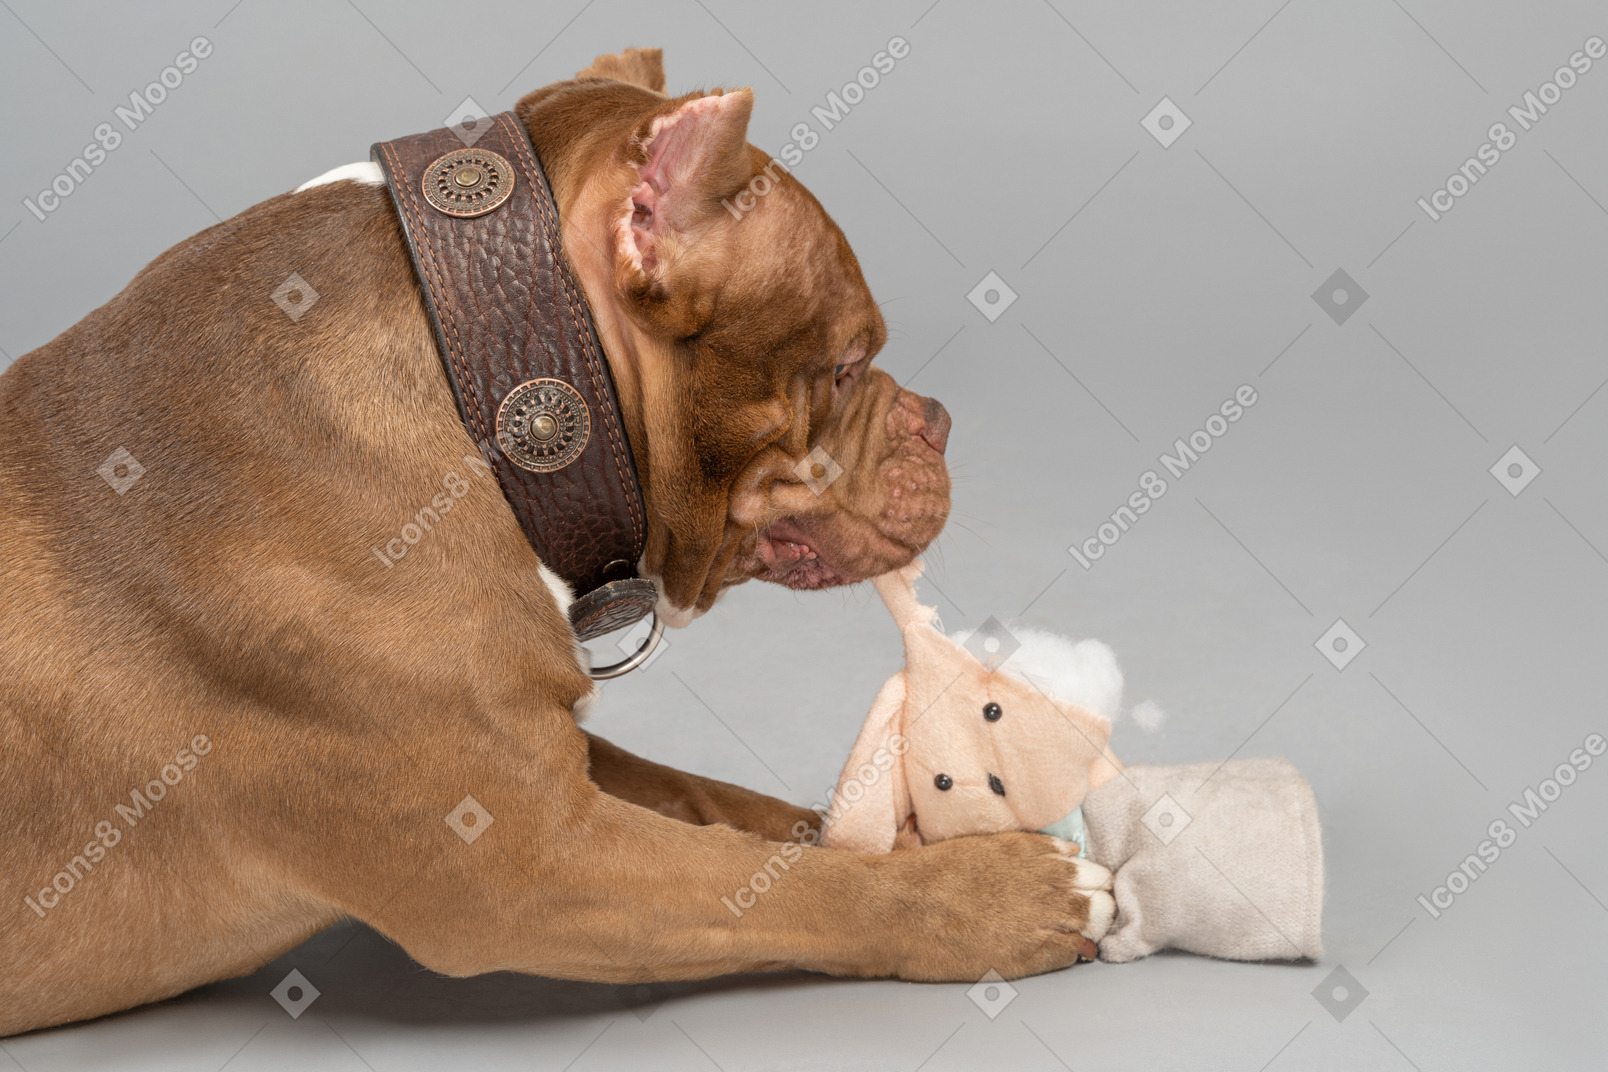 A dog is playing with a toy bunny